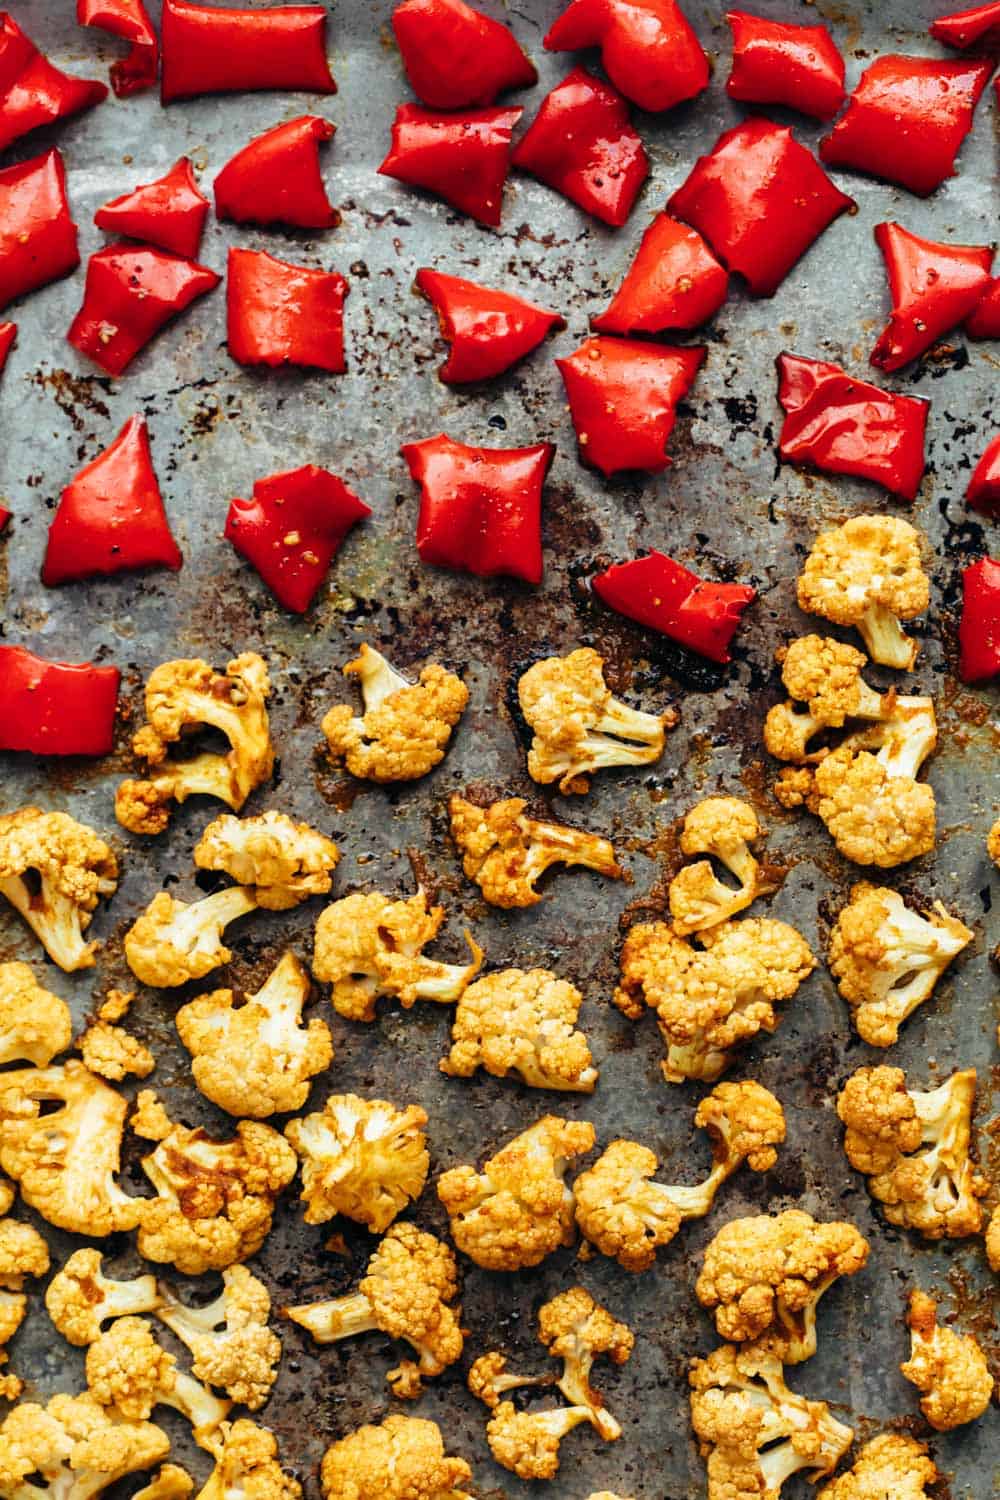 Oven roasted cauliflower and bell peppers on a baking sheet for curried roasted cauliflower bowl